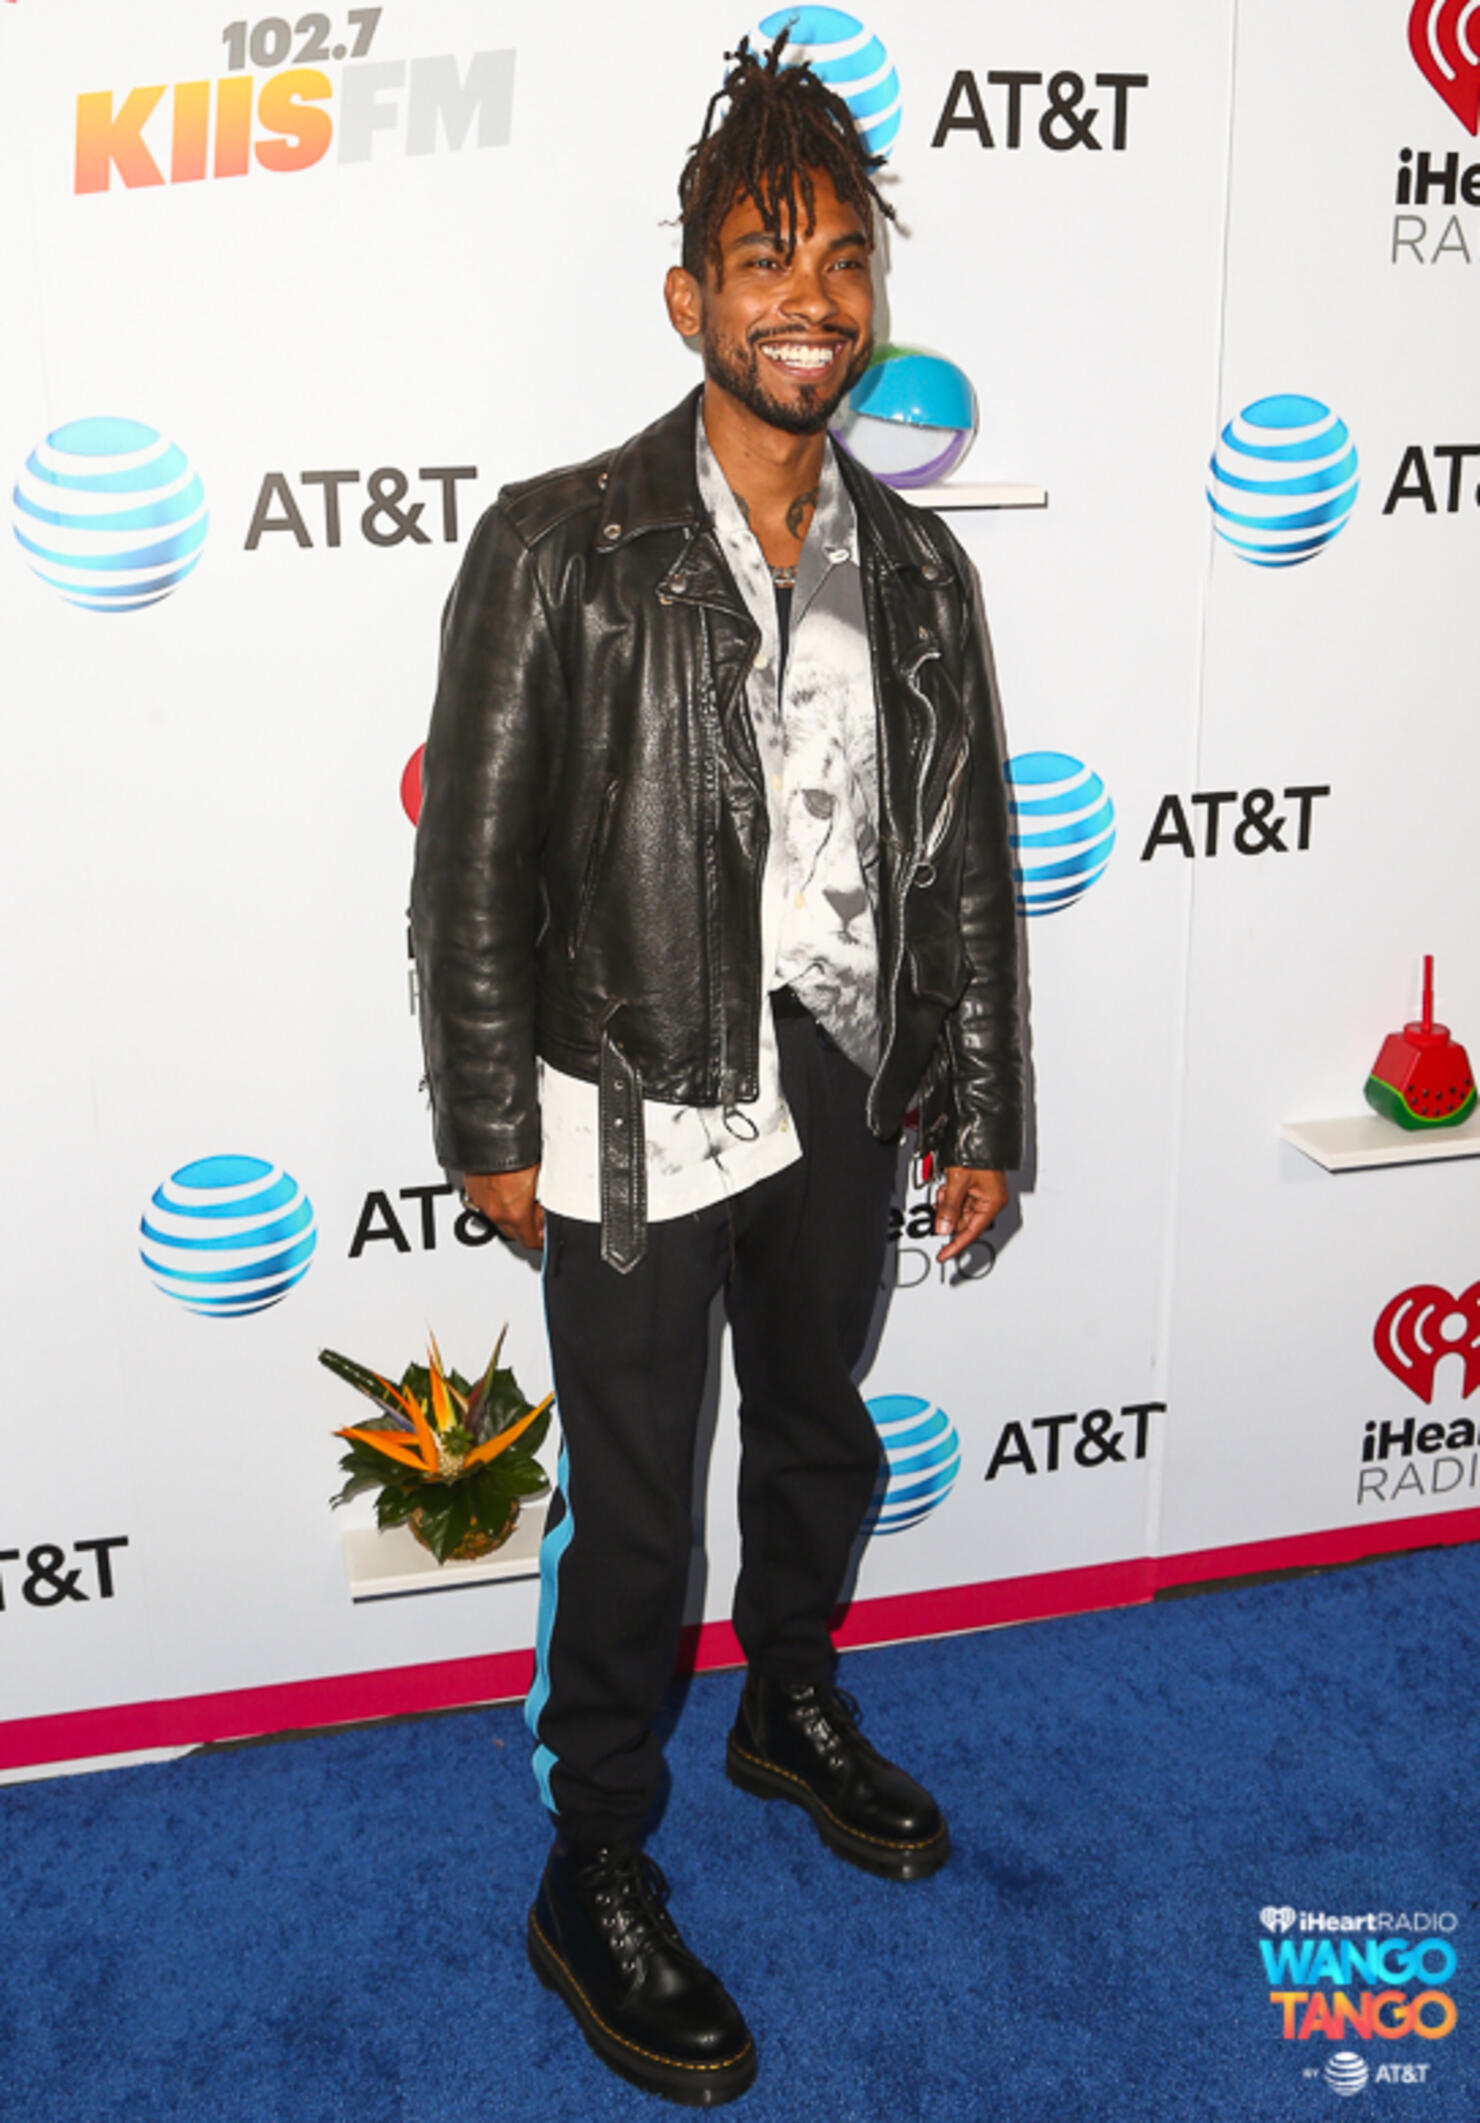 Miguel arrives at the 2018 iHeartRadio Wango Tango by AT&T at Banc of California Stadium on June 2, 2018 in Los Angeles, California.